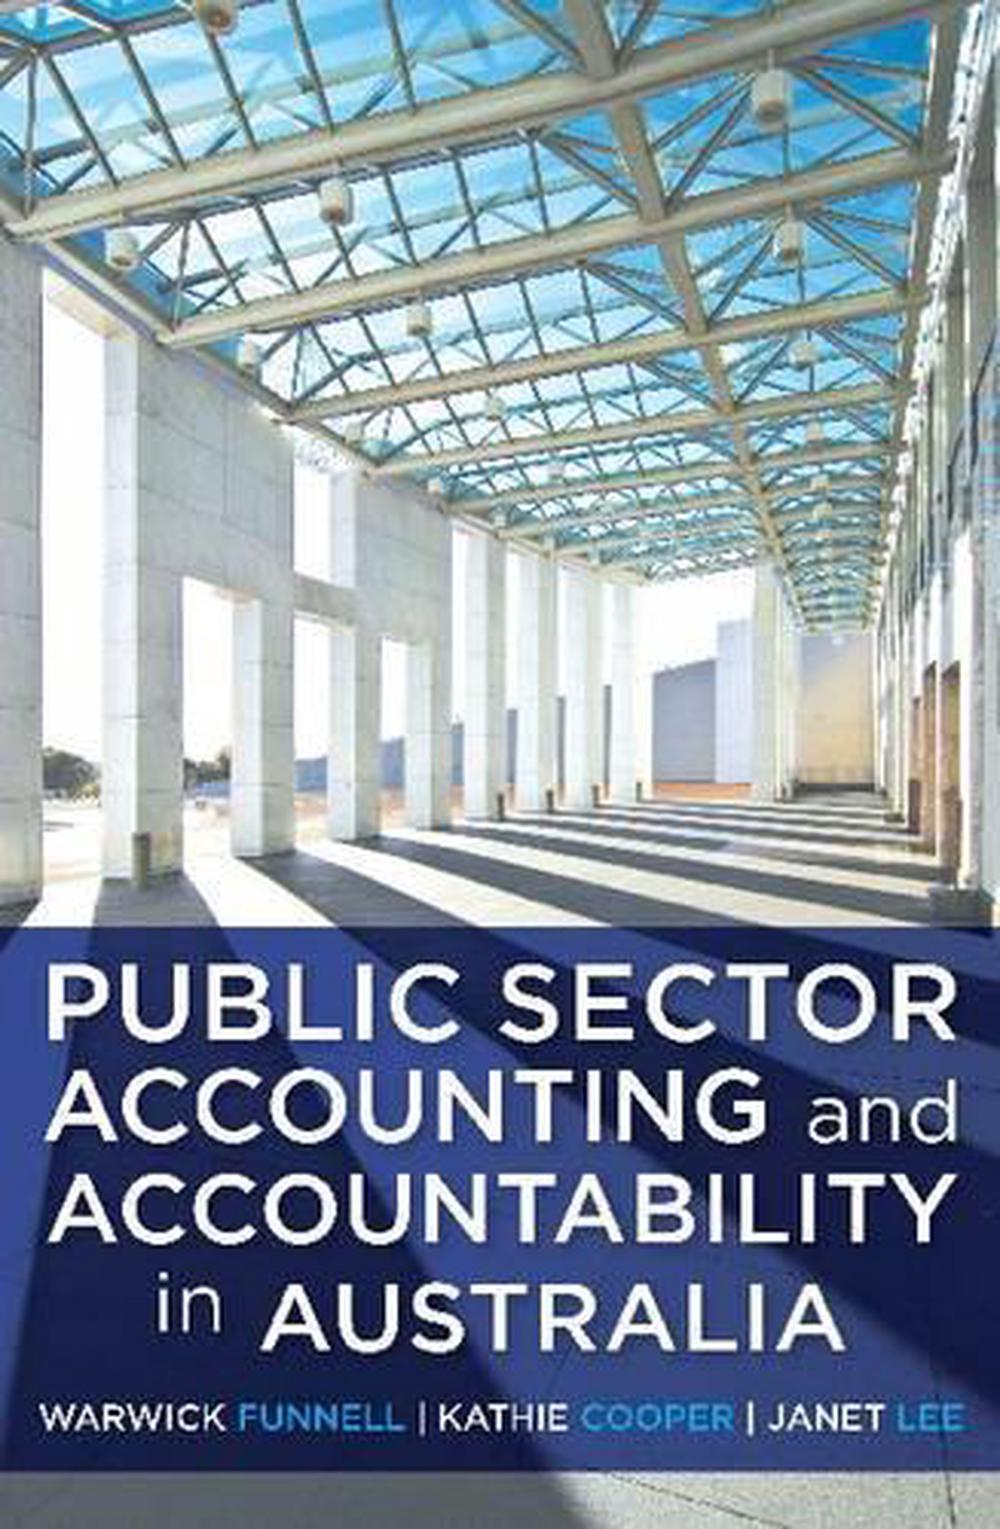 literature review on public sector accounting